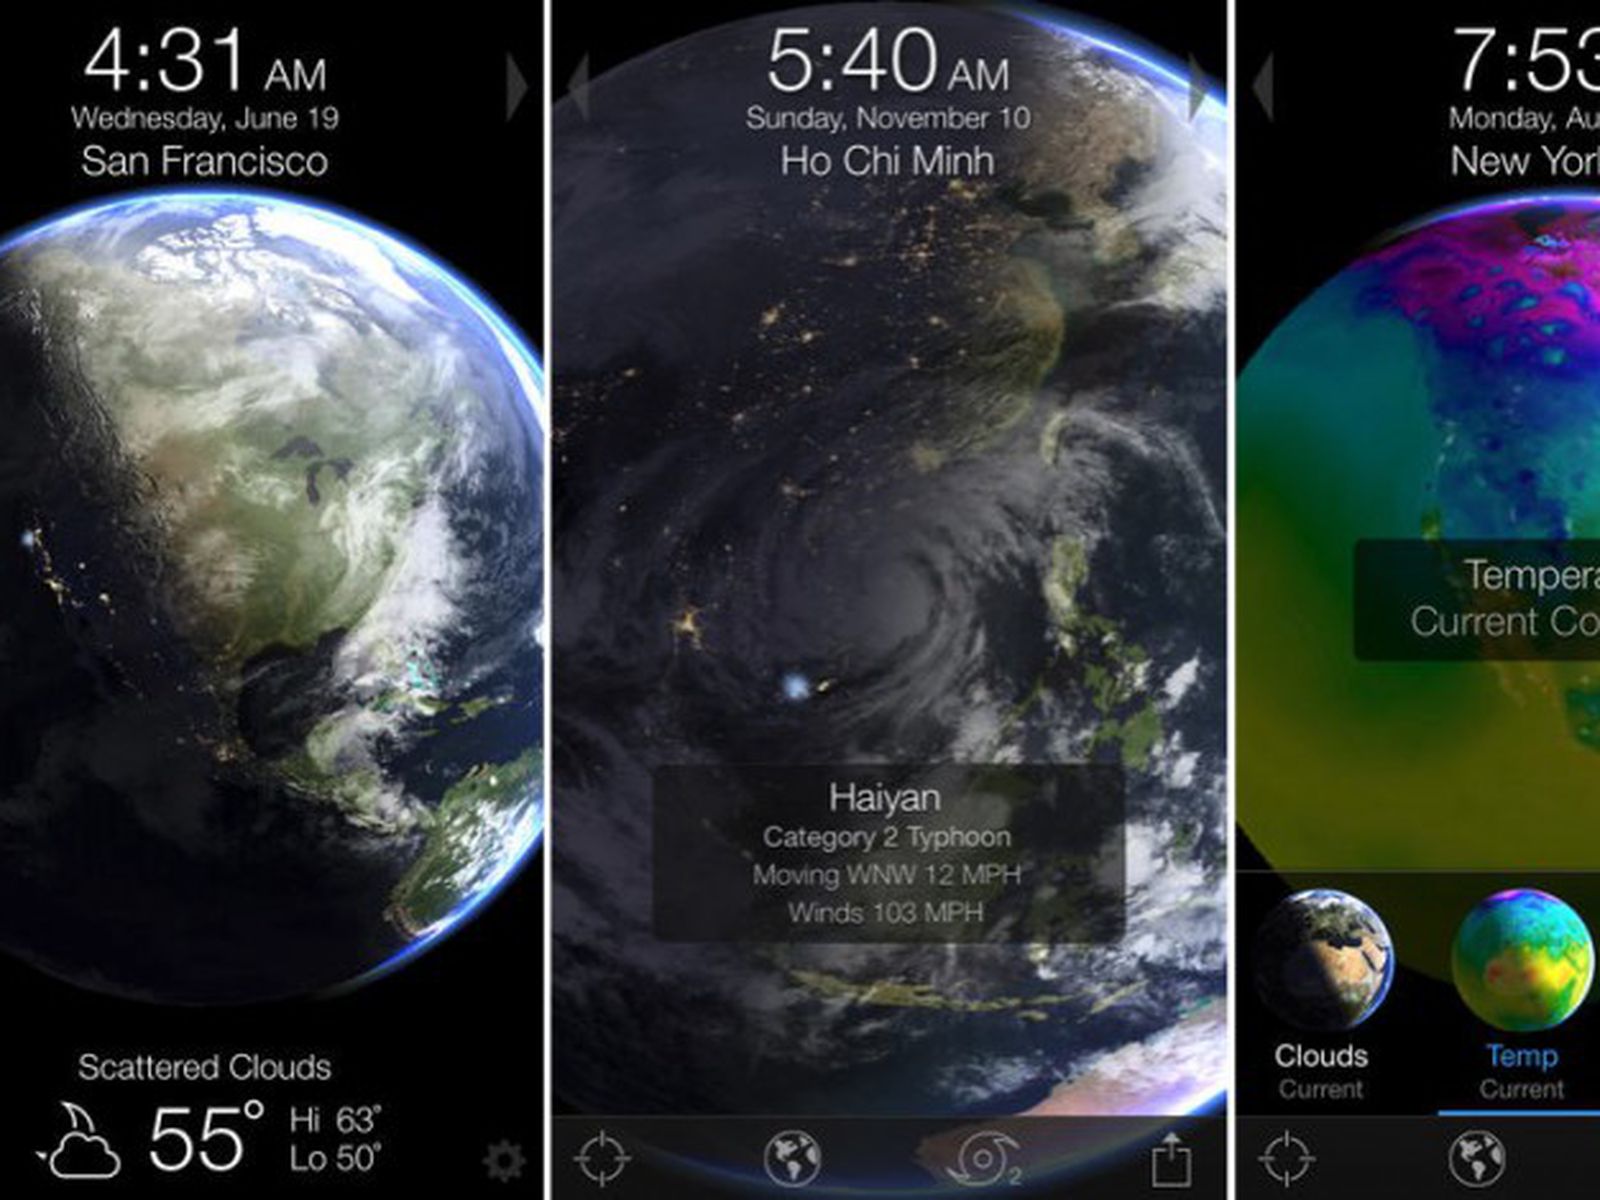 3D Planet Weather Simulator 'Living Earth' Updated with New Visual Design, Background  App Refresh - MacRumors